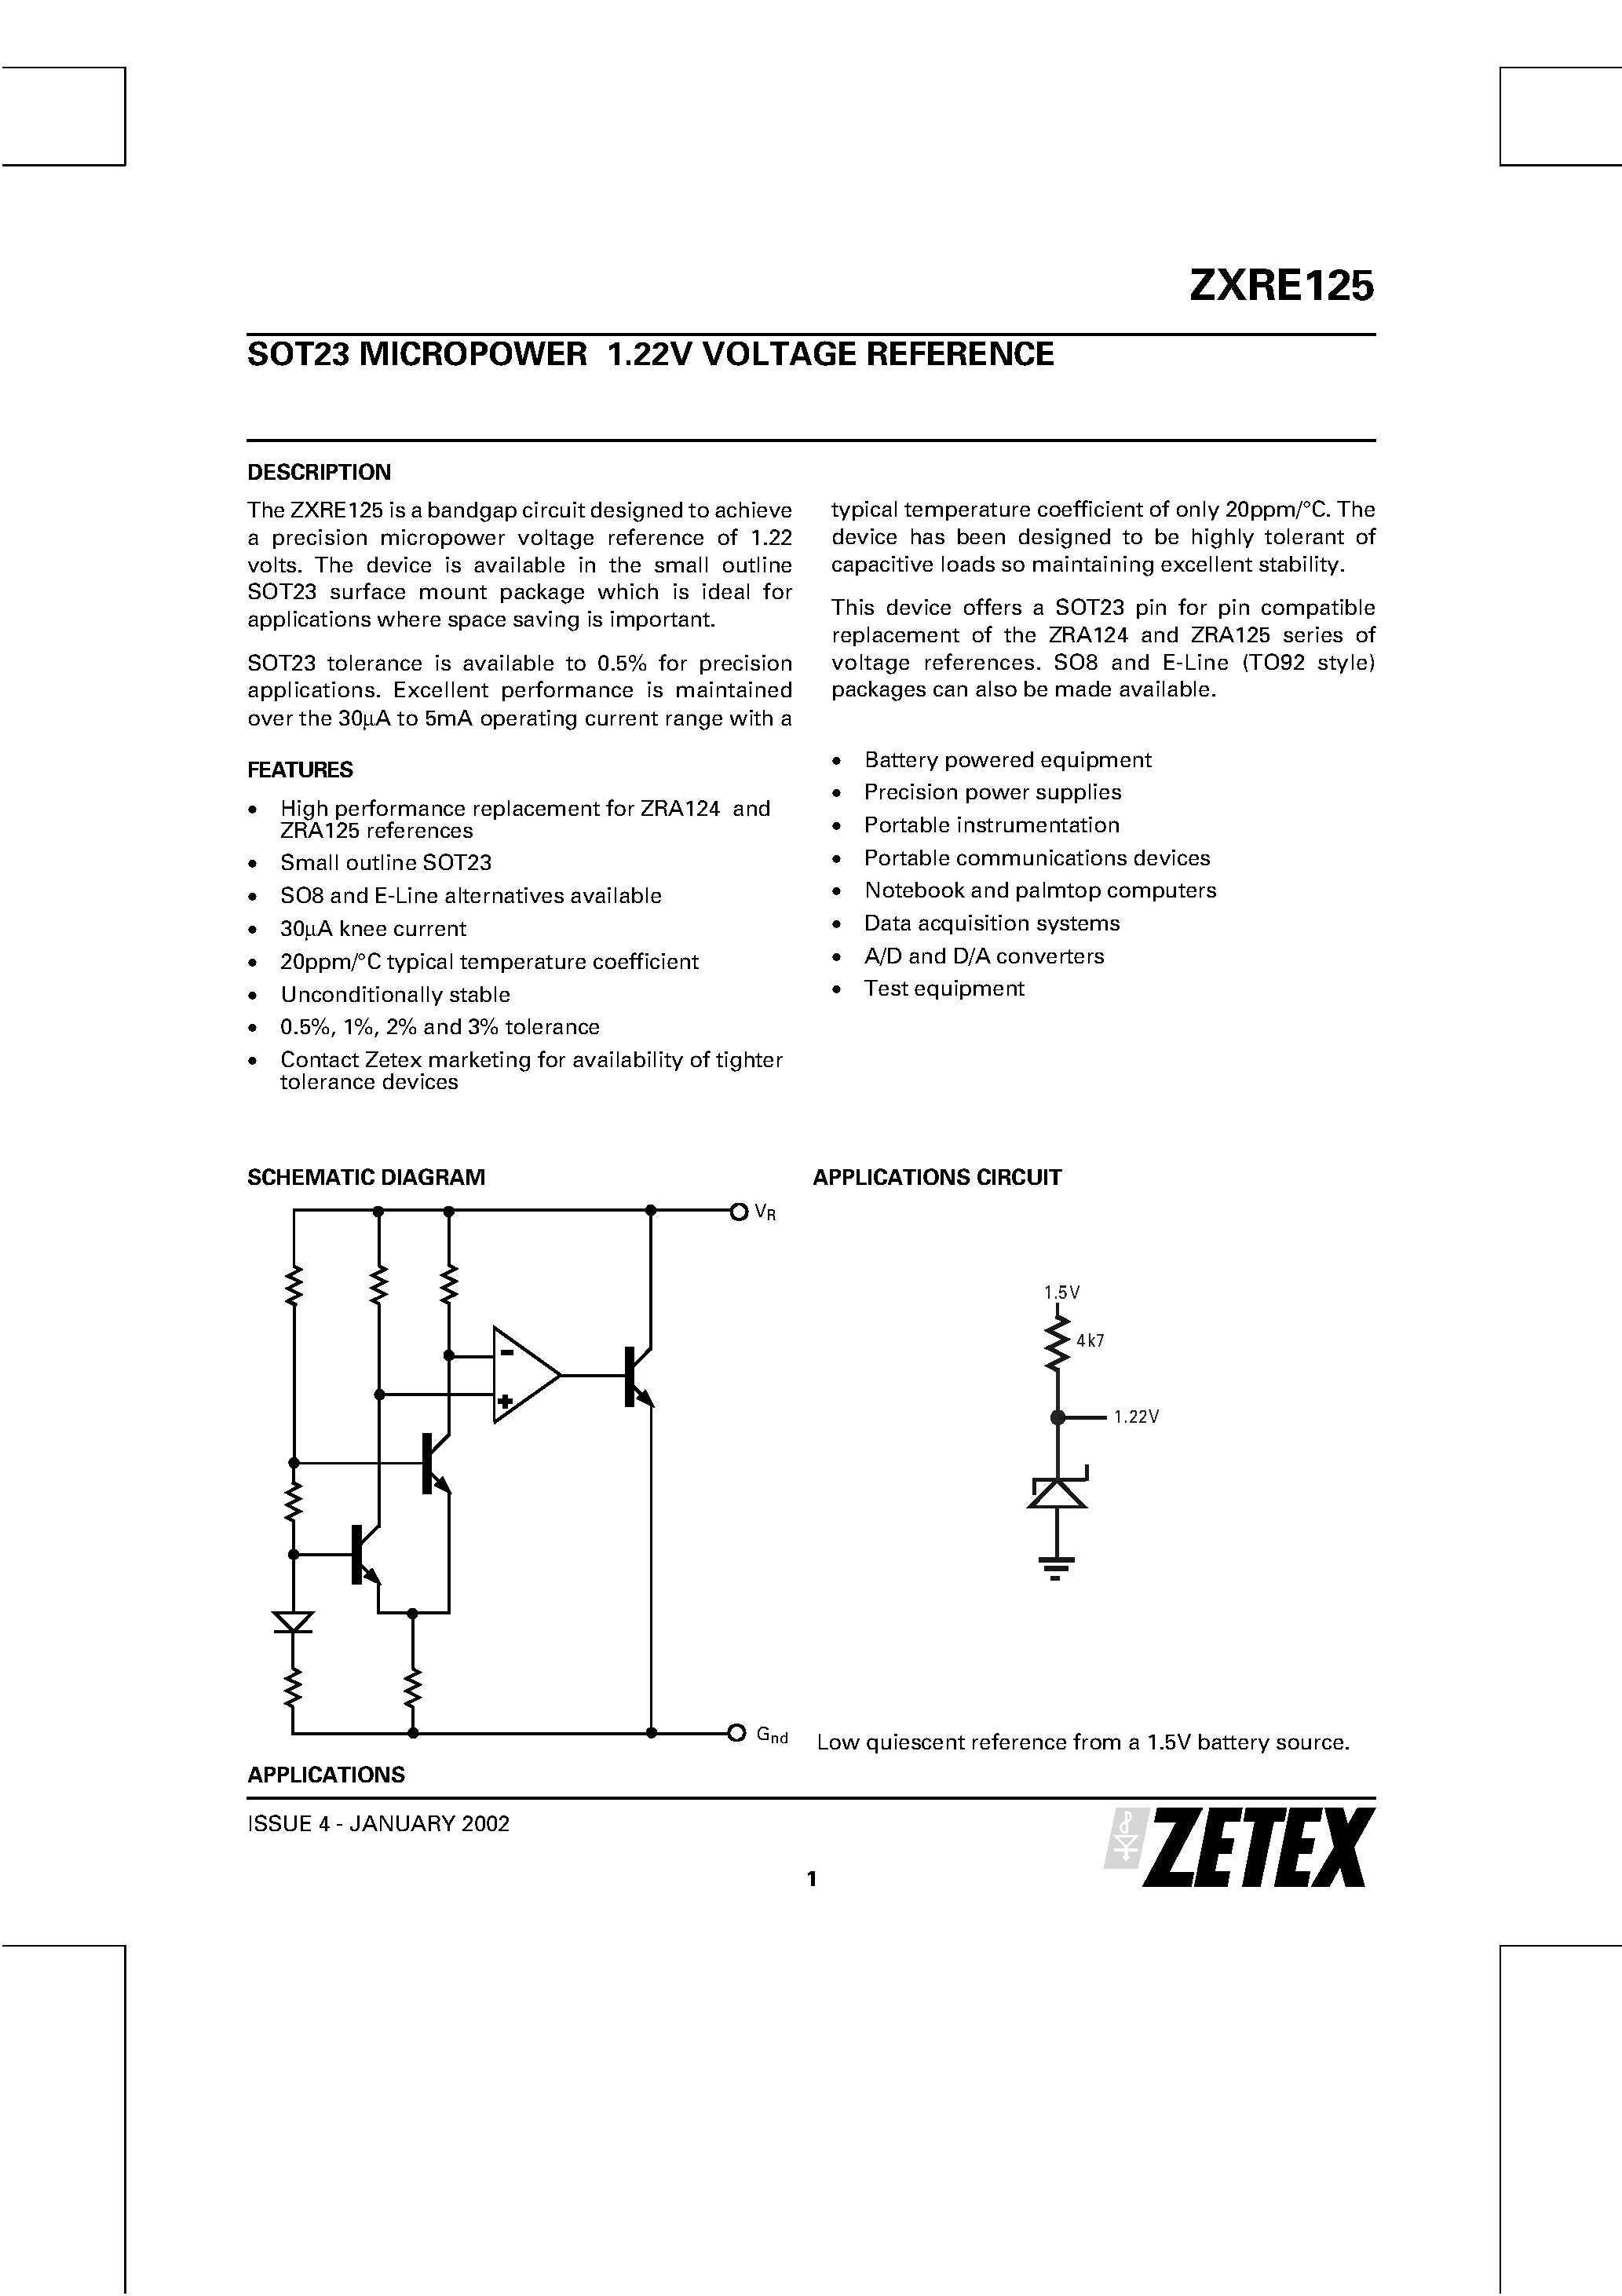 Даташит ZXRE125 - SOT23 MICROPOWER 1.22V VOLTAGE REFERENCE страница 1